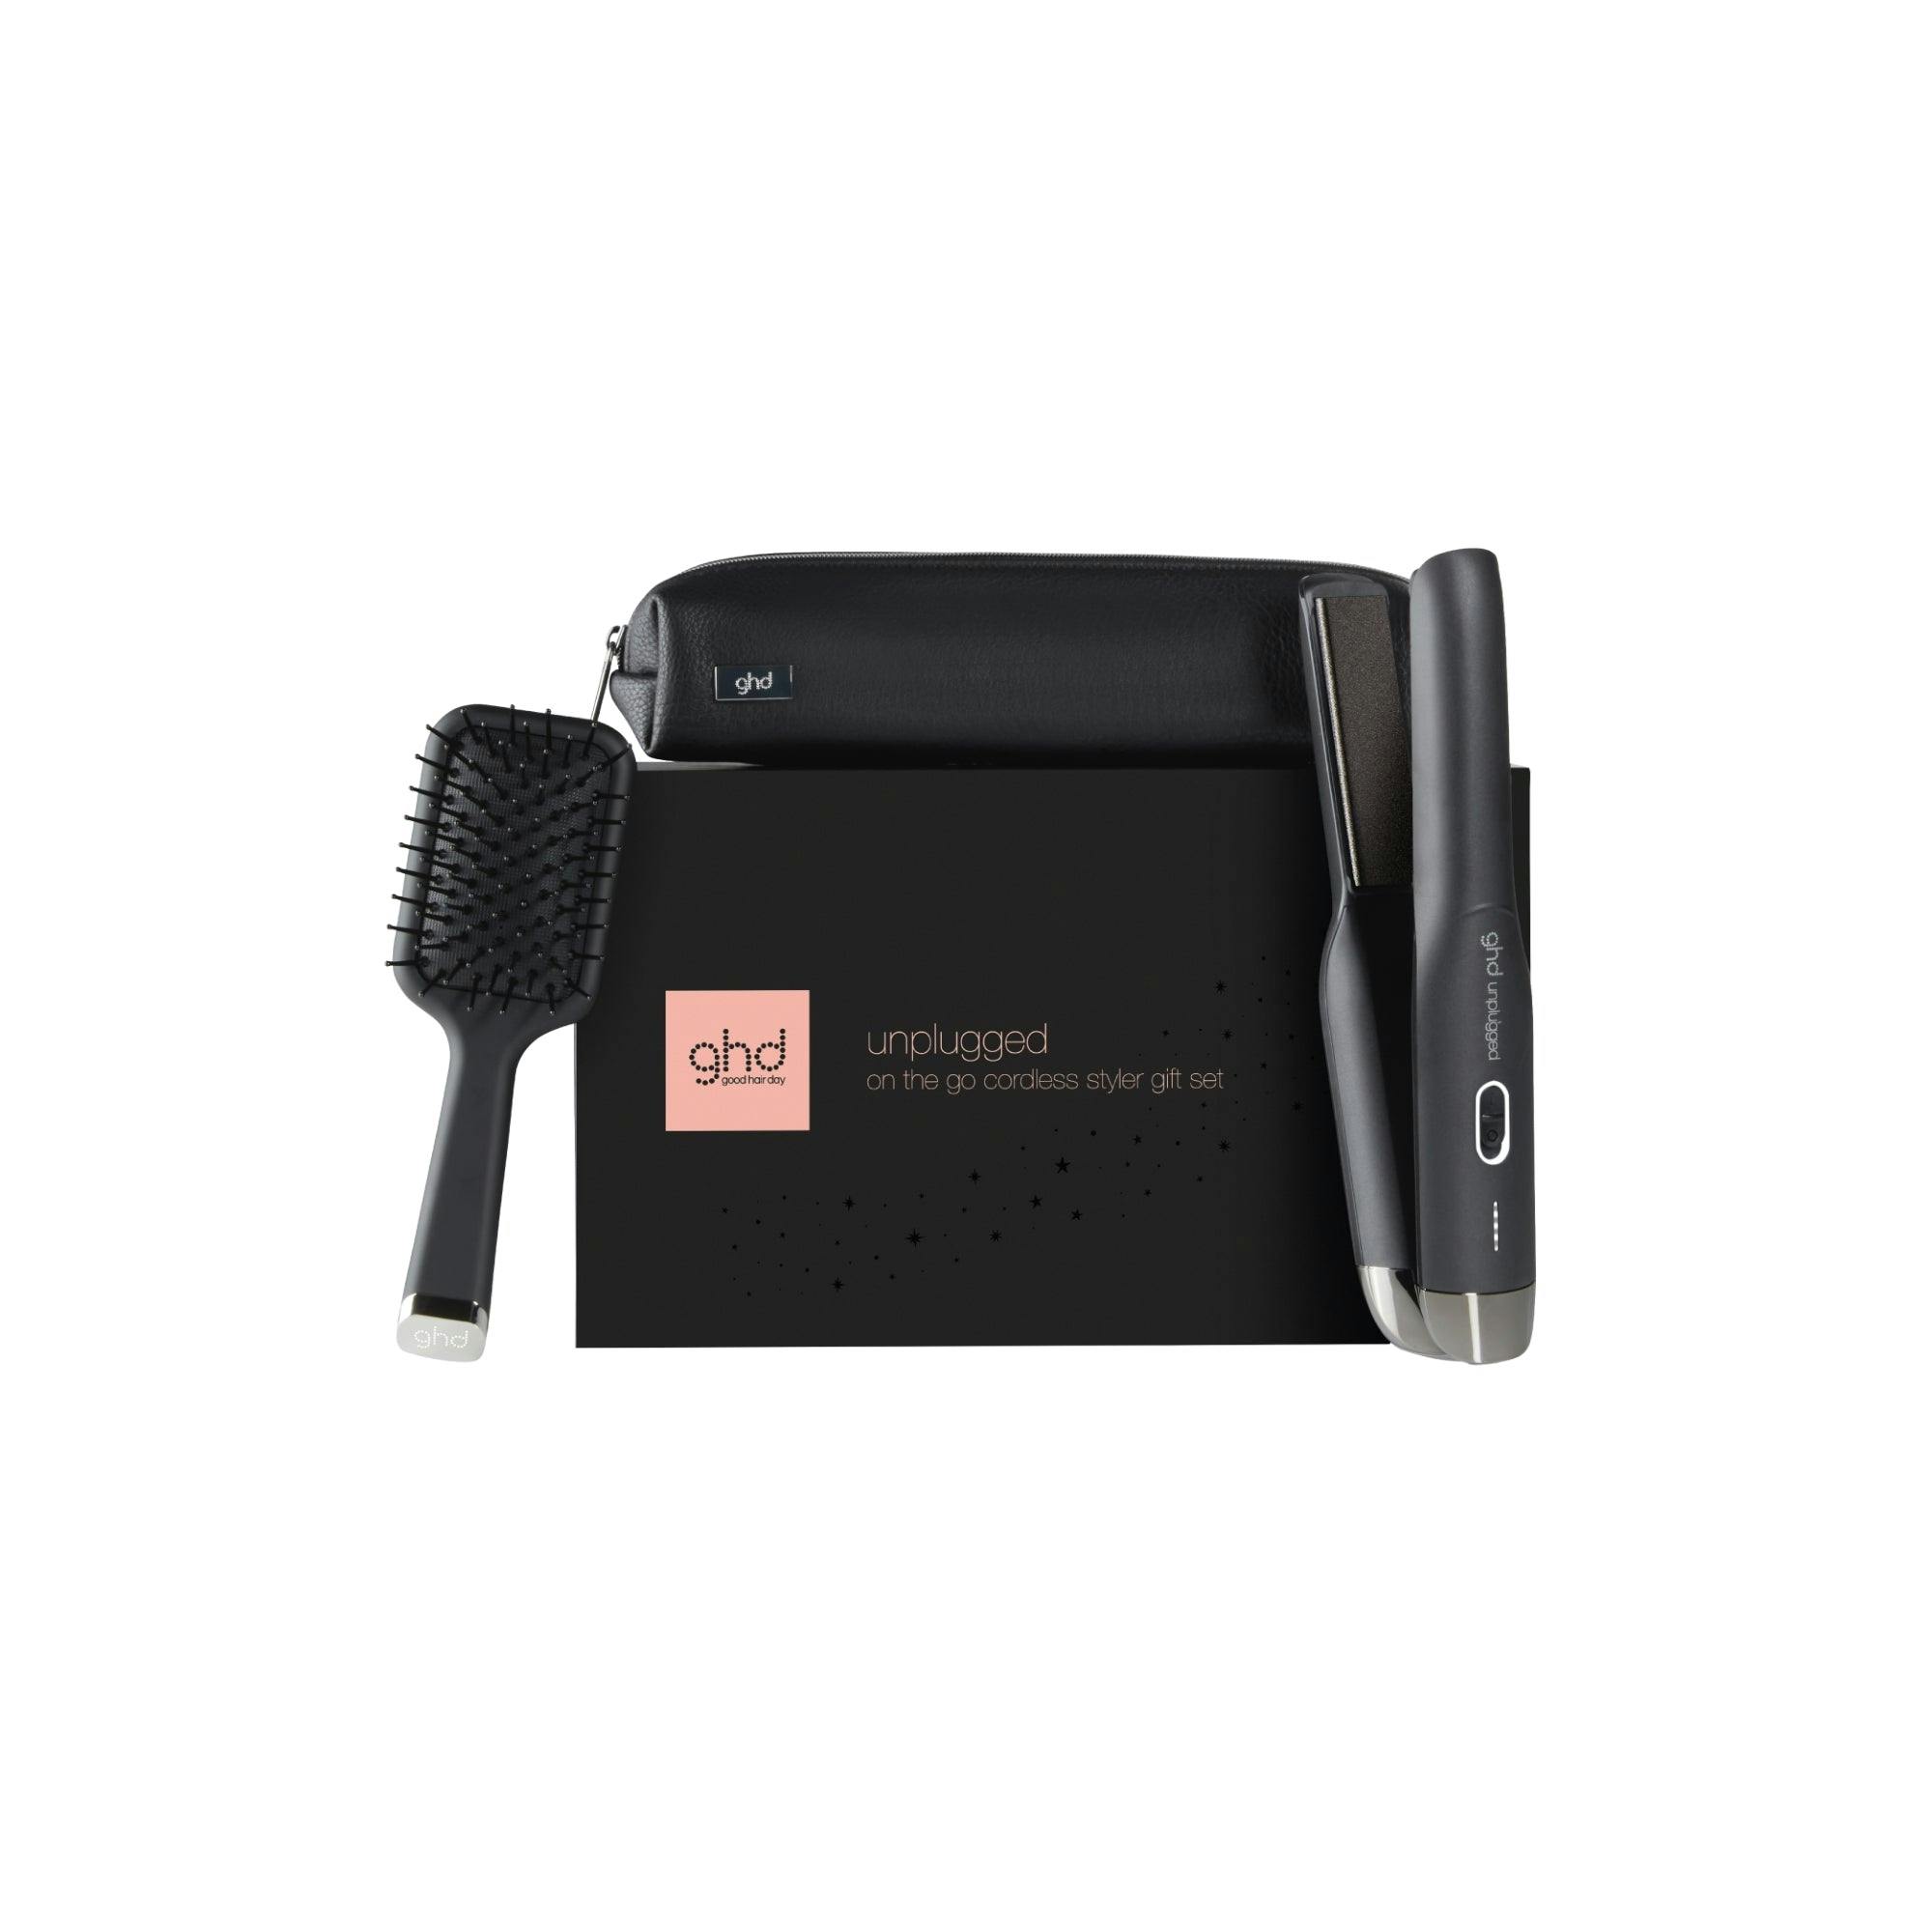 ghd Unplugged Travel Gift Set